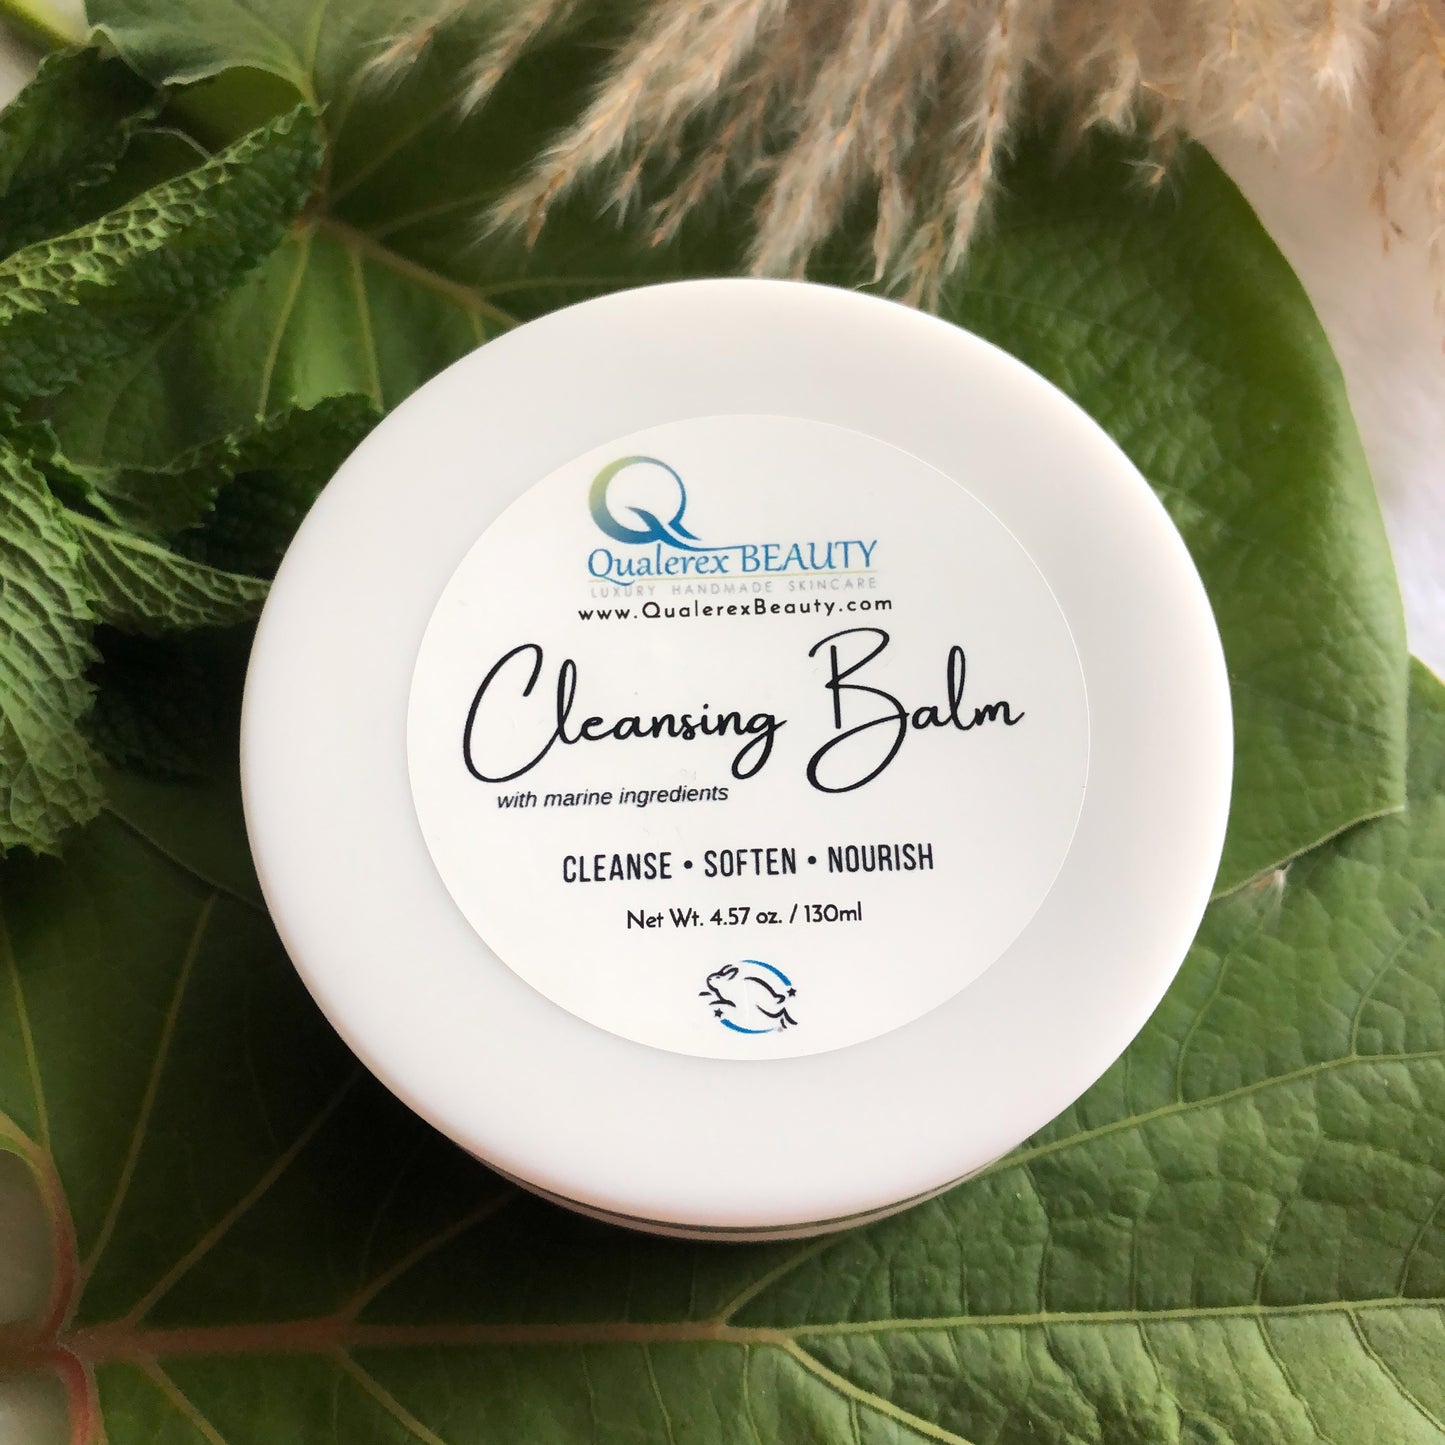 Qualerex Beauty Cleansing Balm with Marine Ingredients